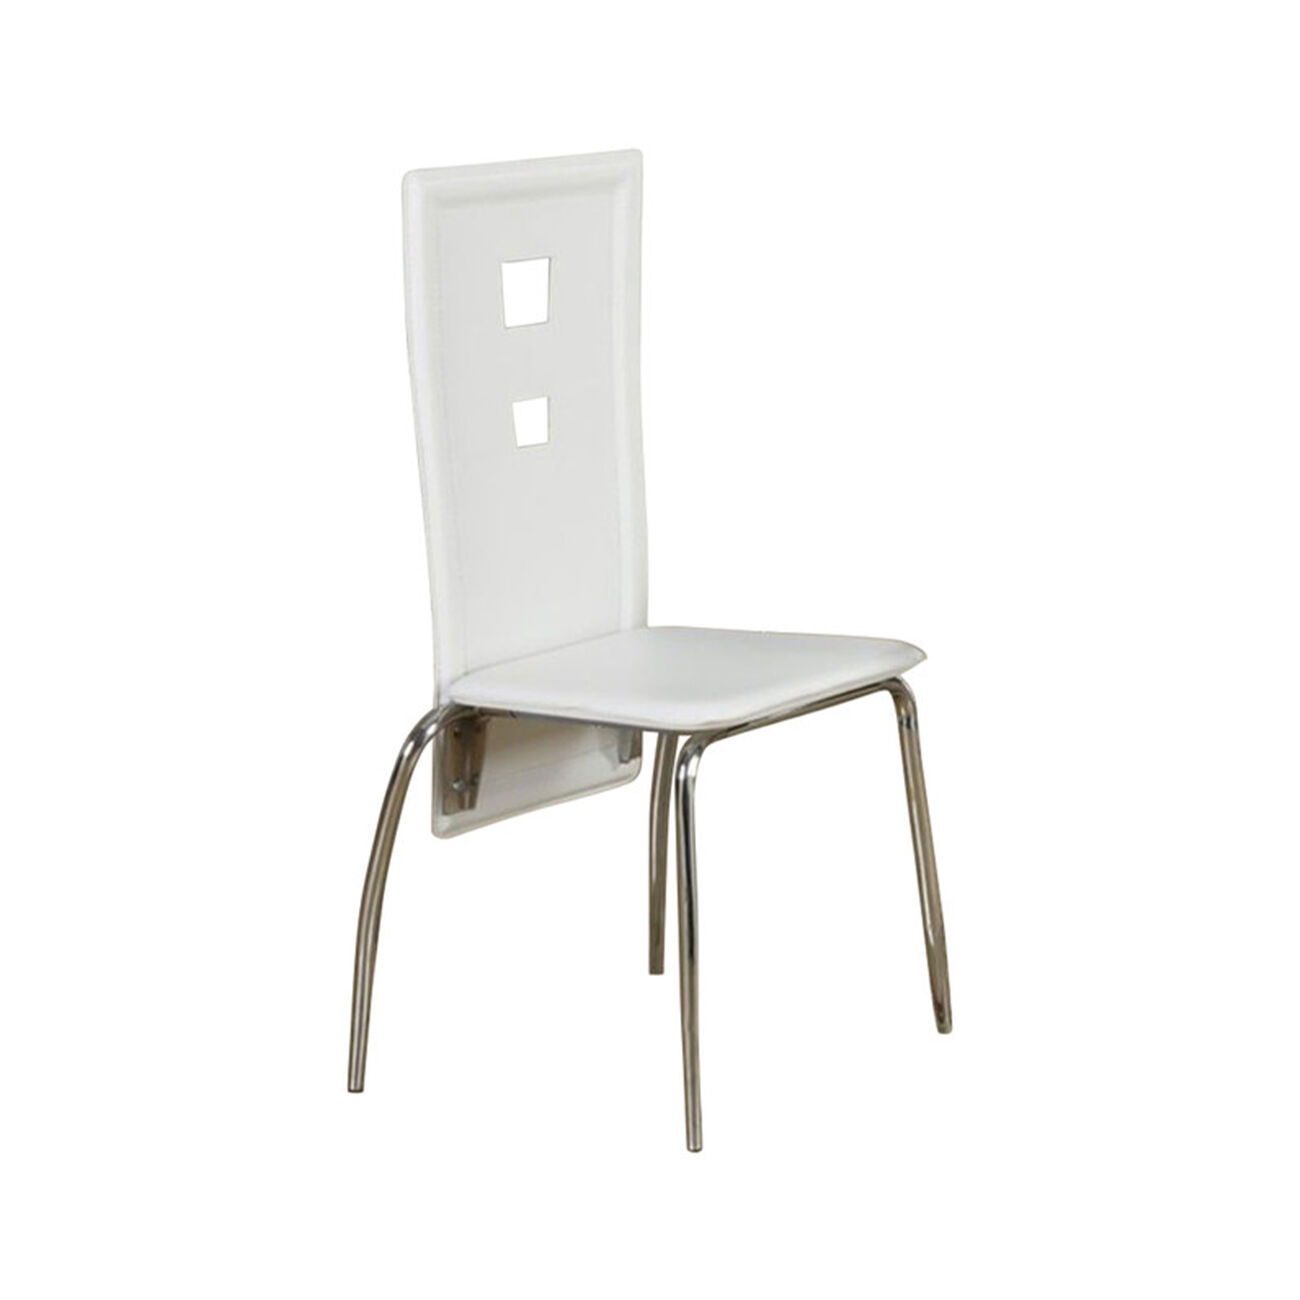 Set Of 2 Metal Dining Chair With Cutout Back, White And Chrome